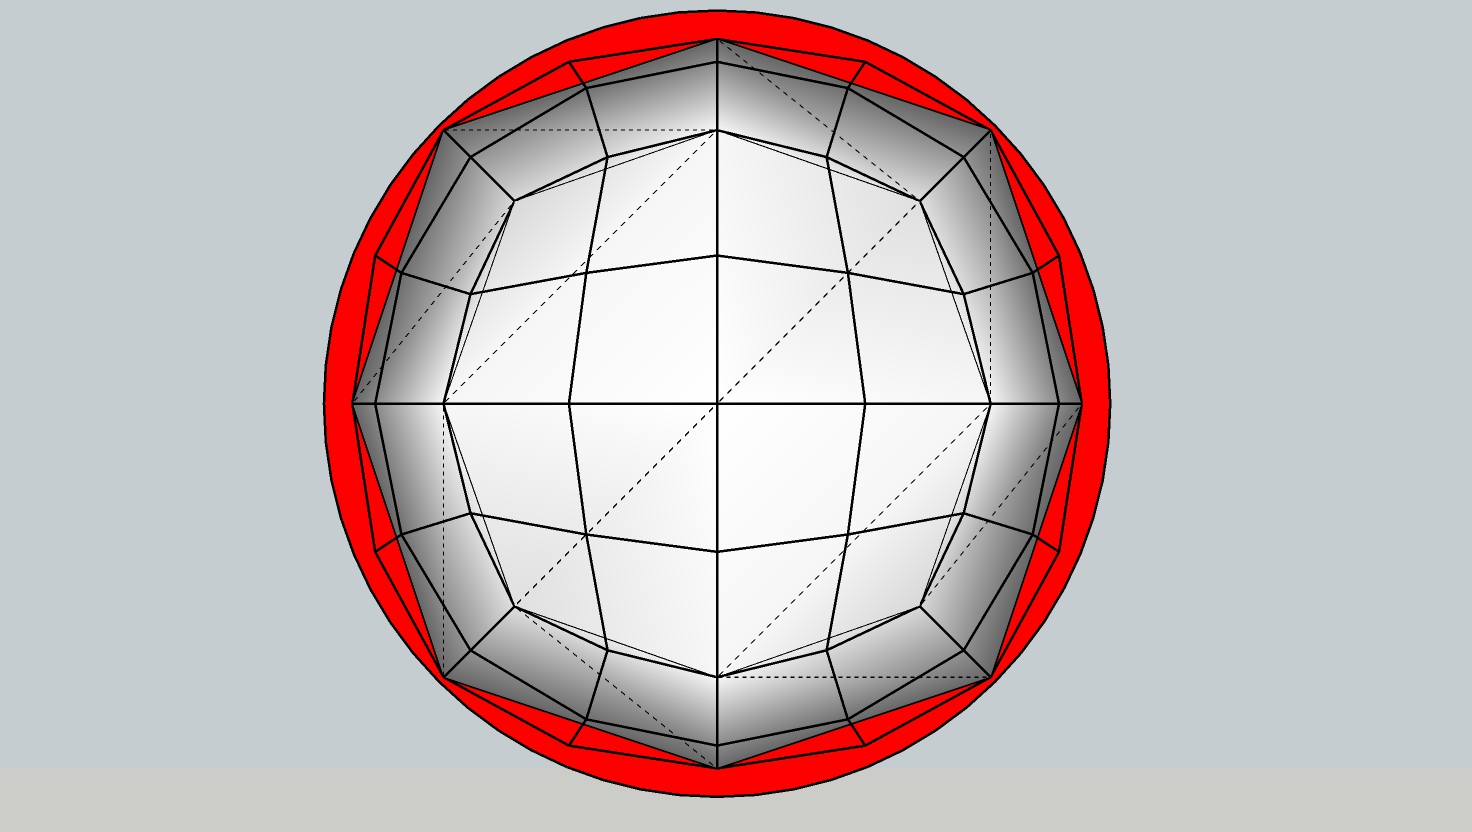 CatMull Interpolated Mesh around the Subdivided Cube